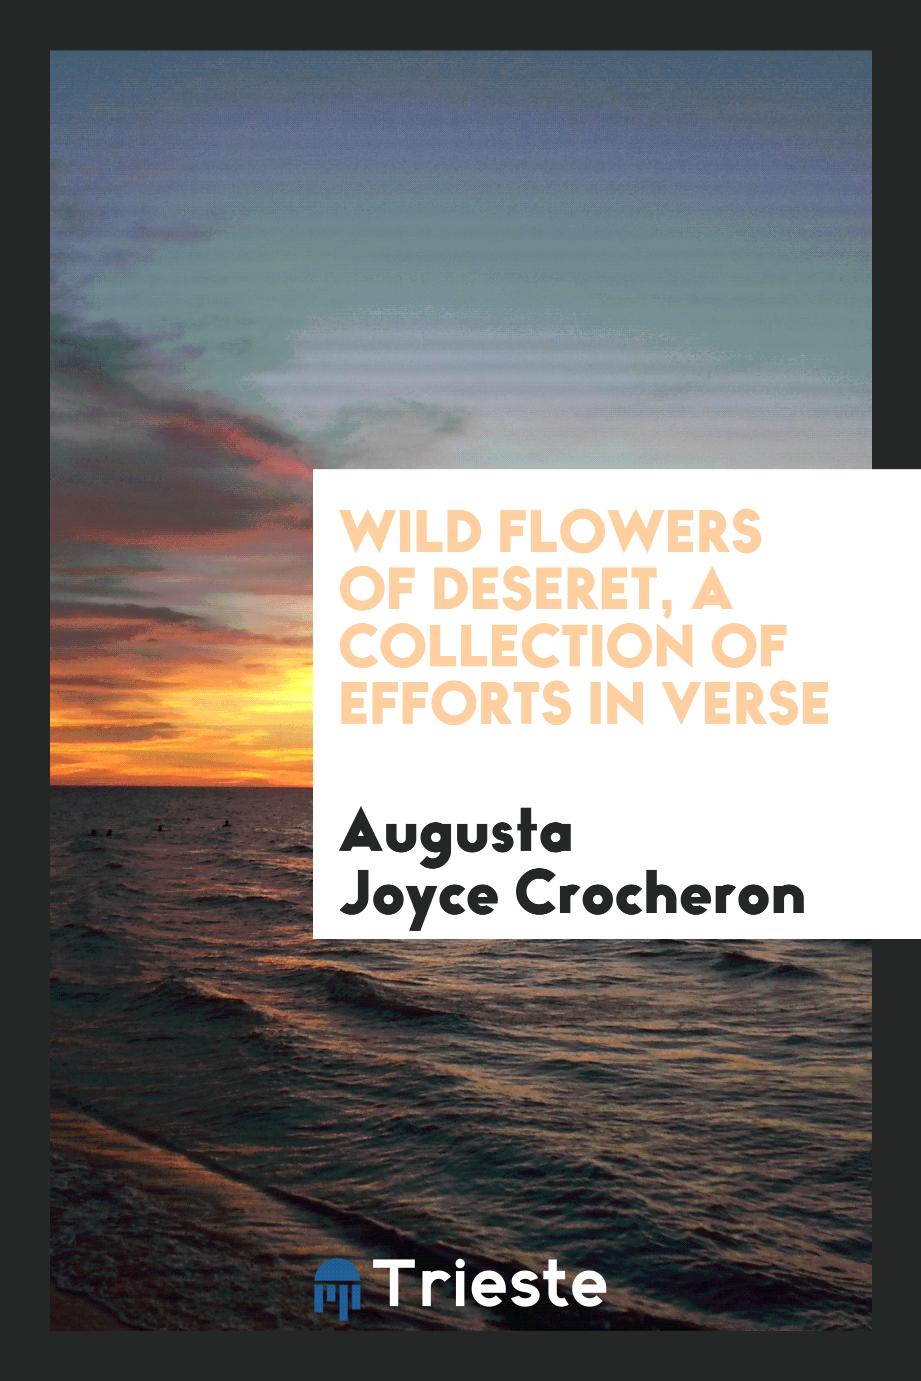 Wild flowers of Deseret, a collection of efforts in verse